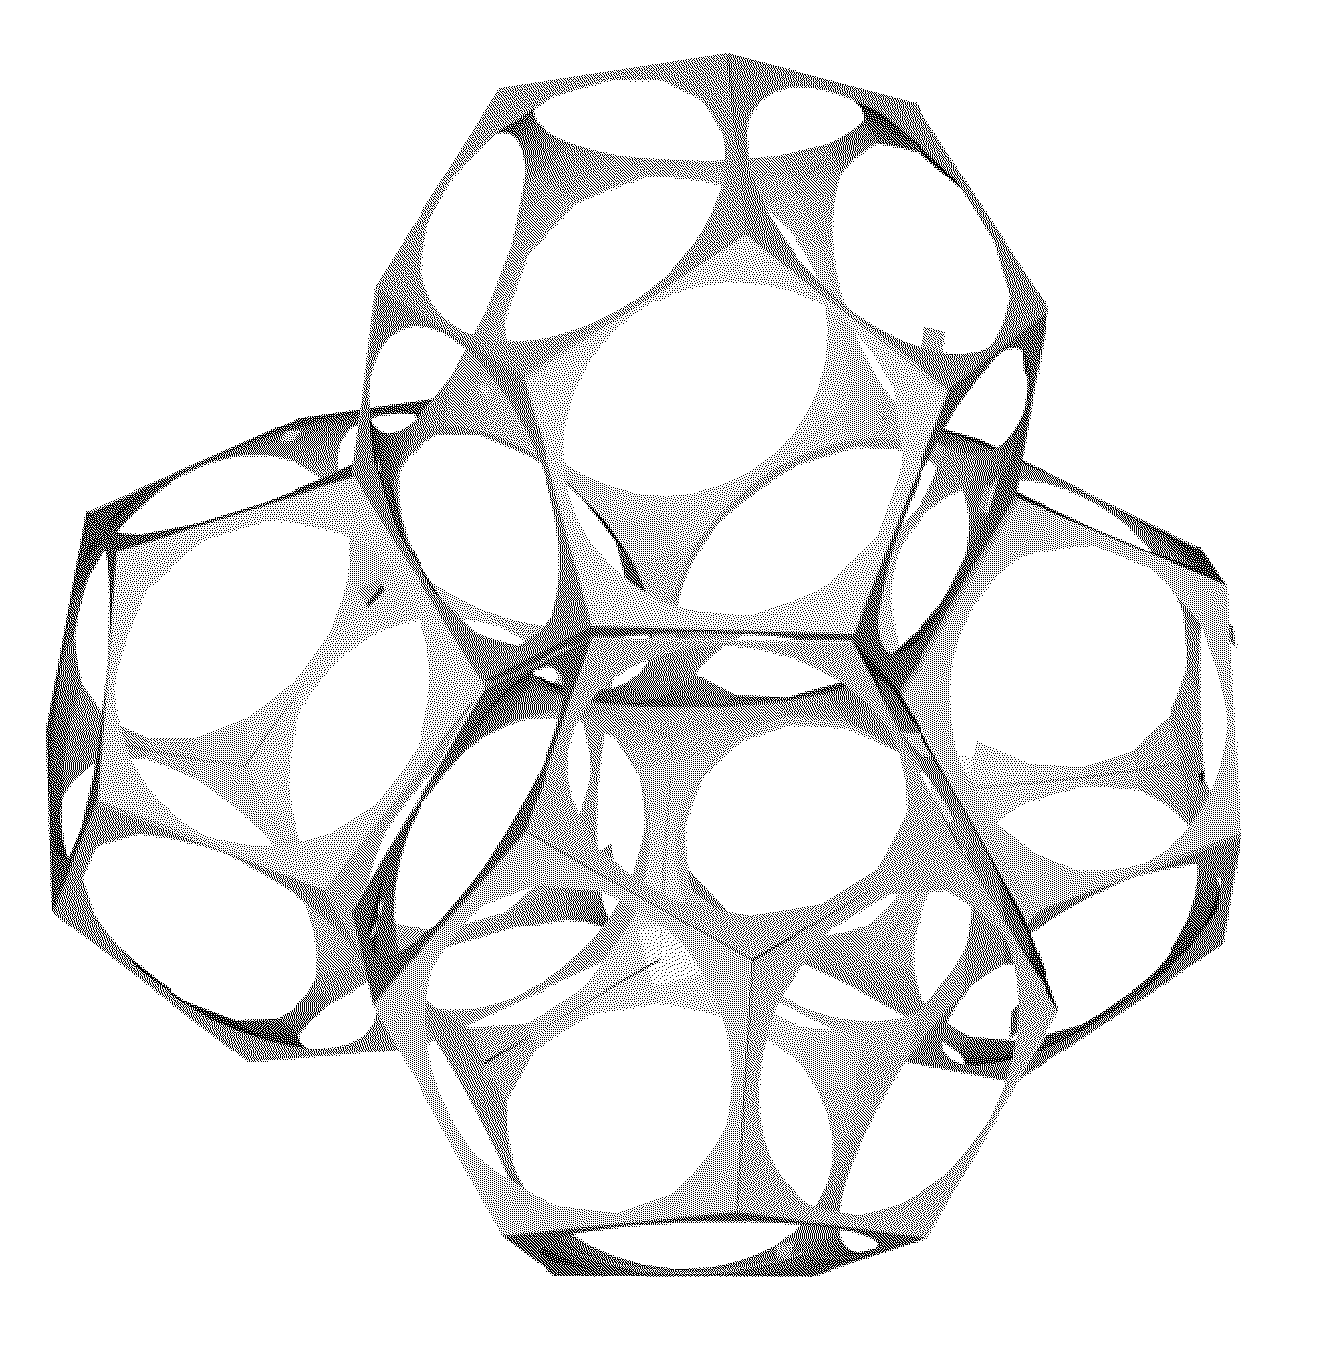 Inorganic structures with controlled open cell porosity and articles made therefrom